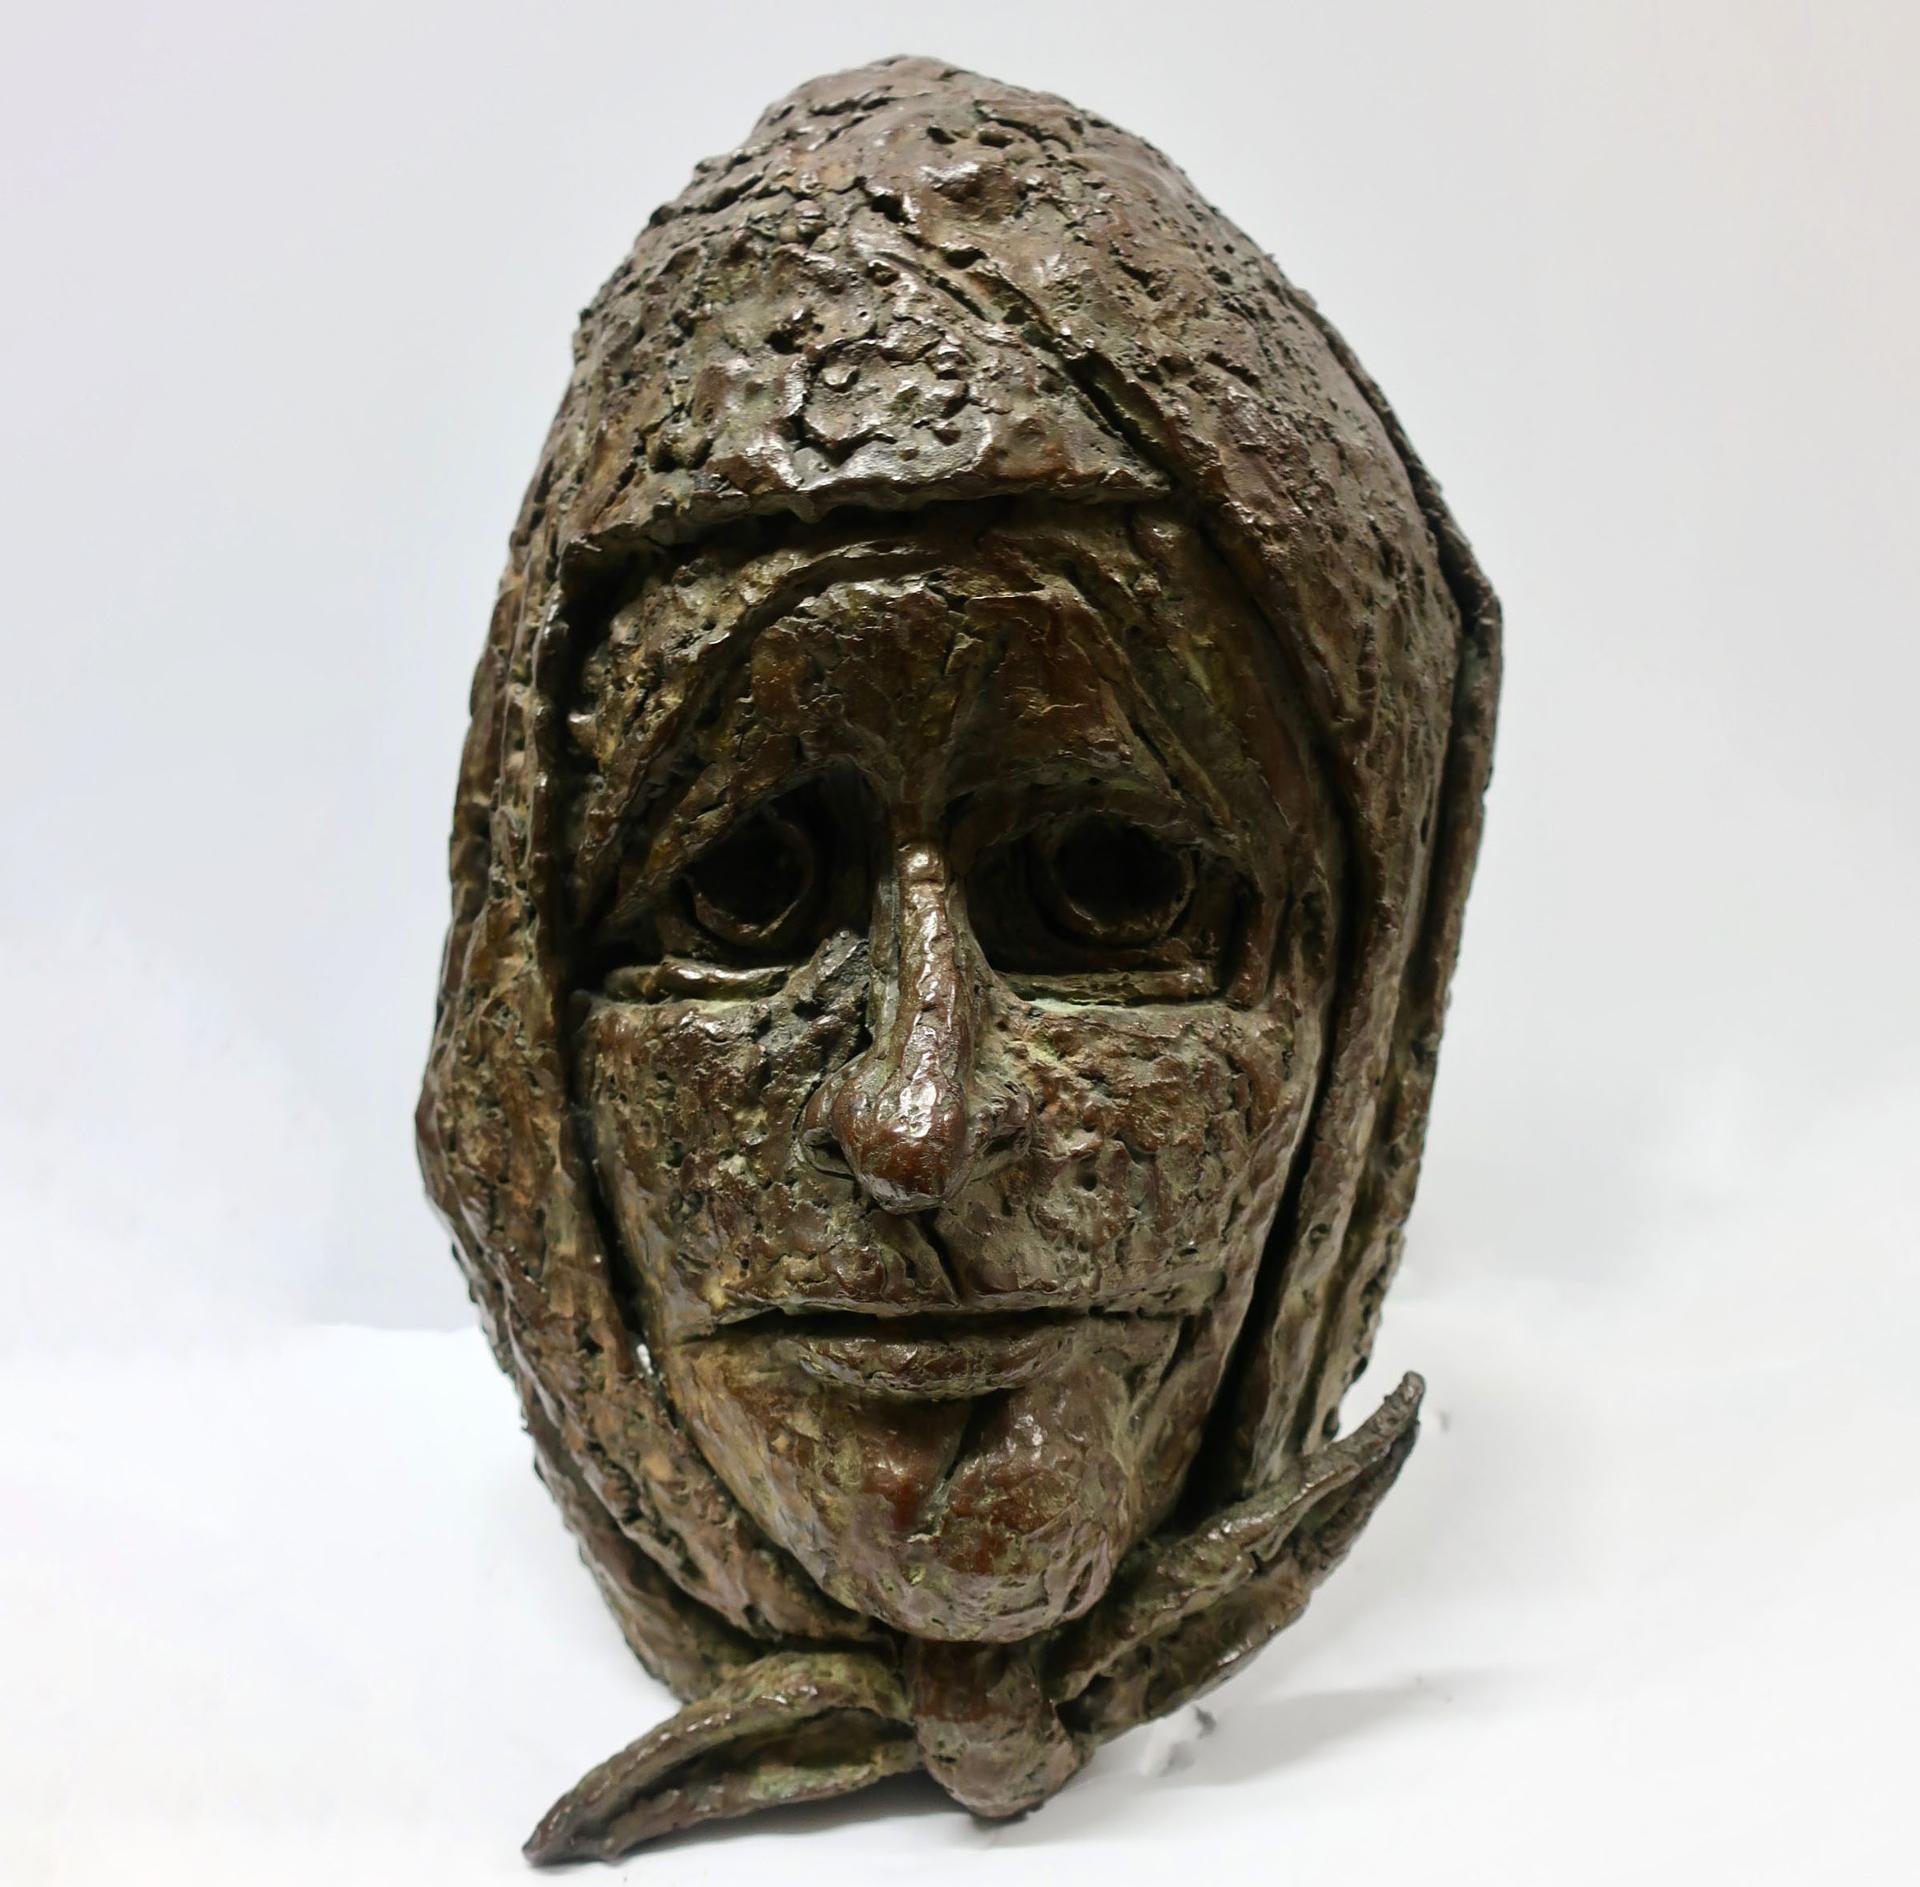 Mary Hecht - Peasant Woman (Mother Courage)